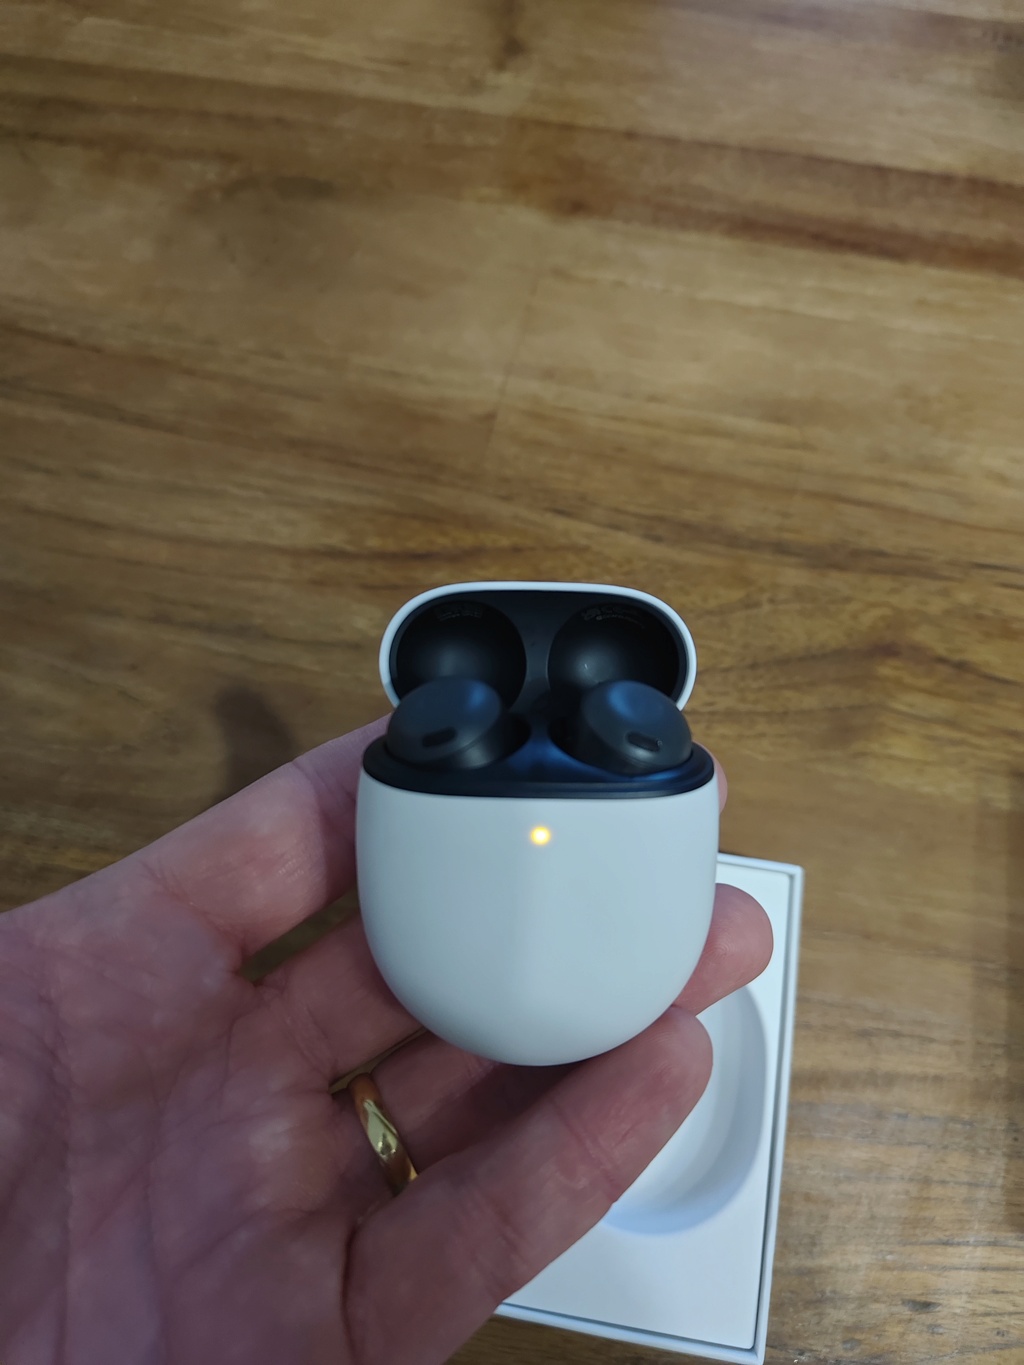 [Vds] Google Pixel Buds pro 2 neufs / Beoplay E8 2/ chassis drone fpv/ wifi mesh / Casque sennheiser / trackball Img_2010